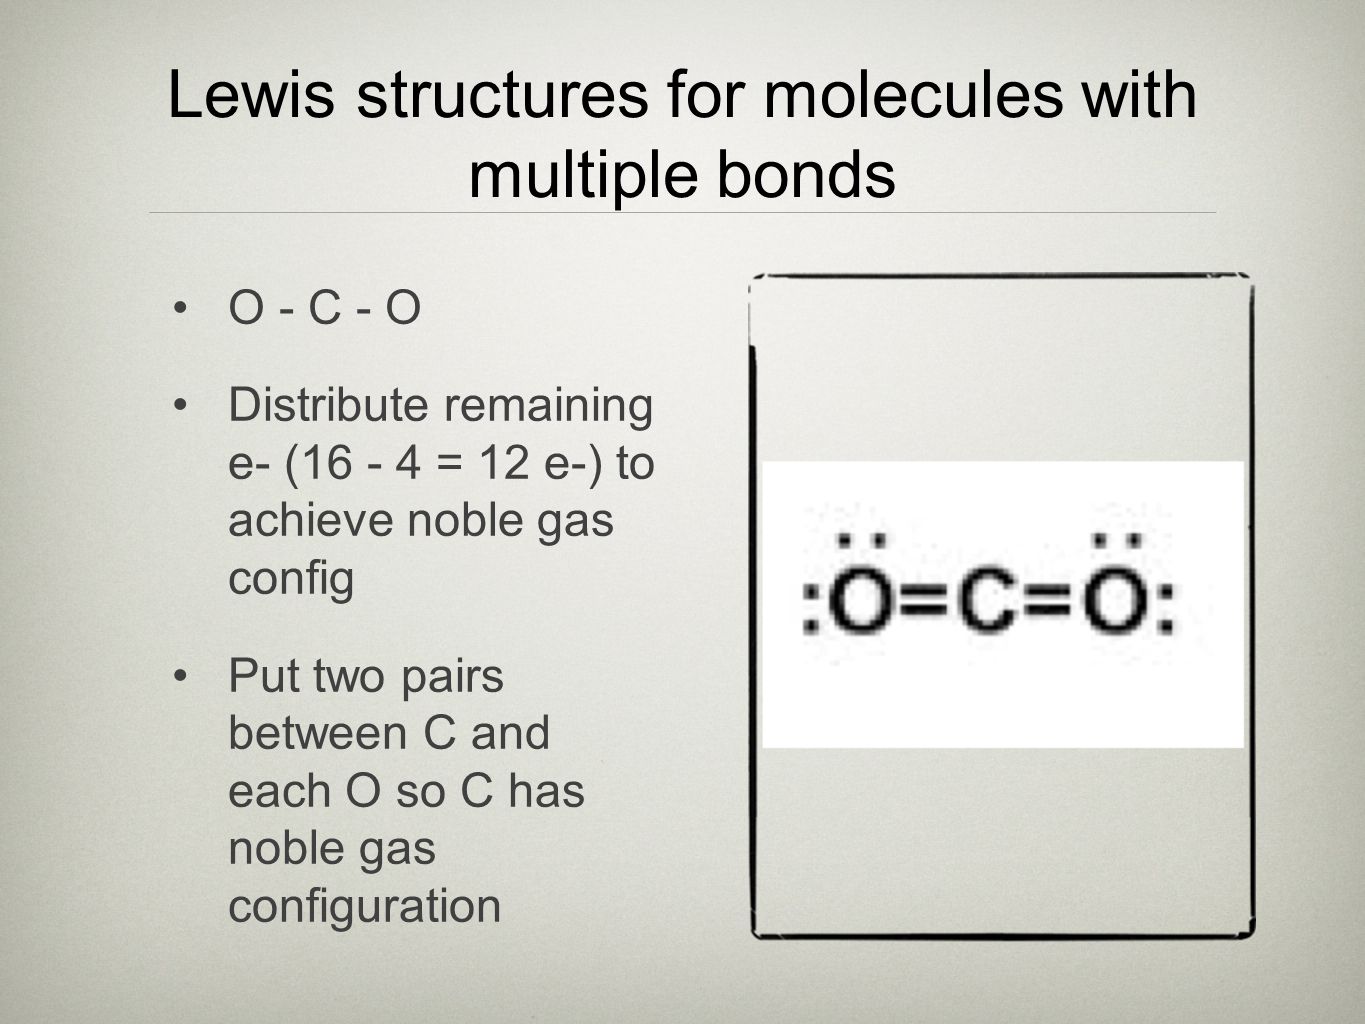 Lewis structures for molecules with multiple bonds